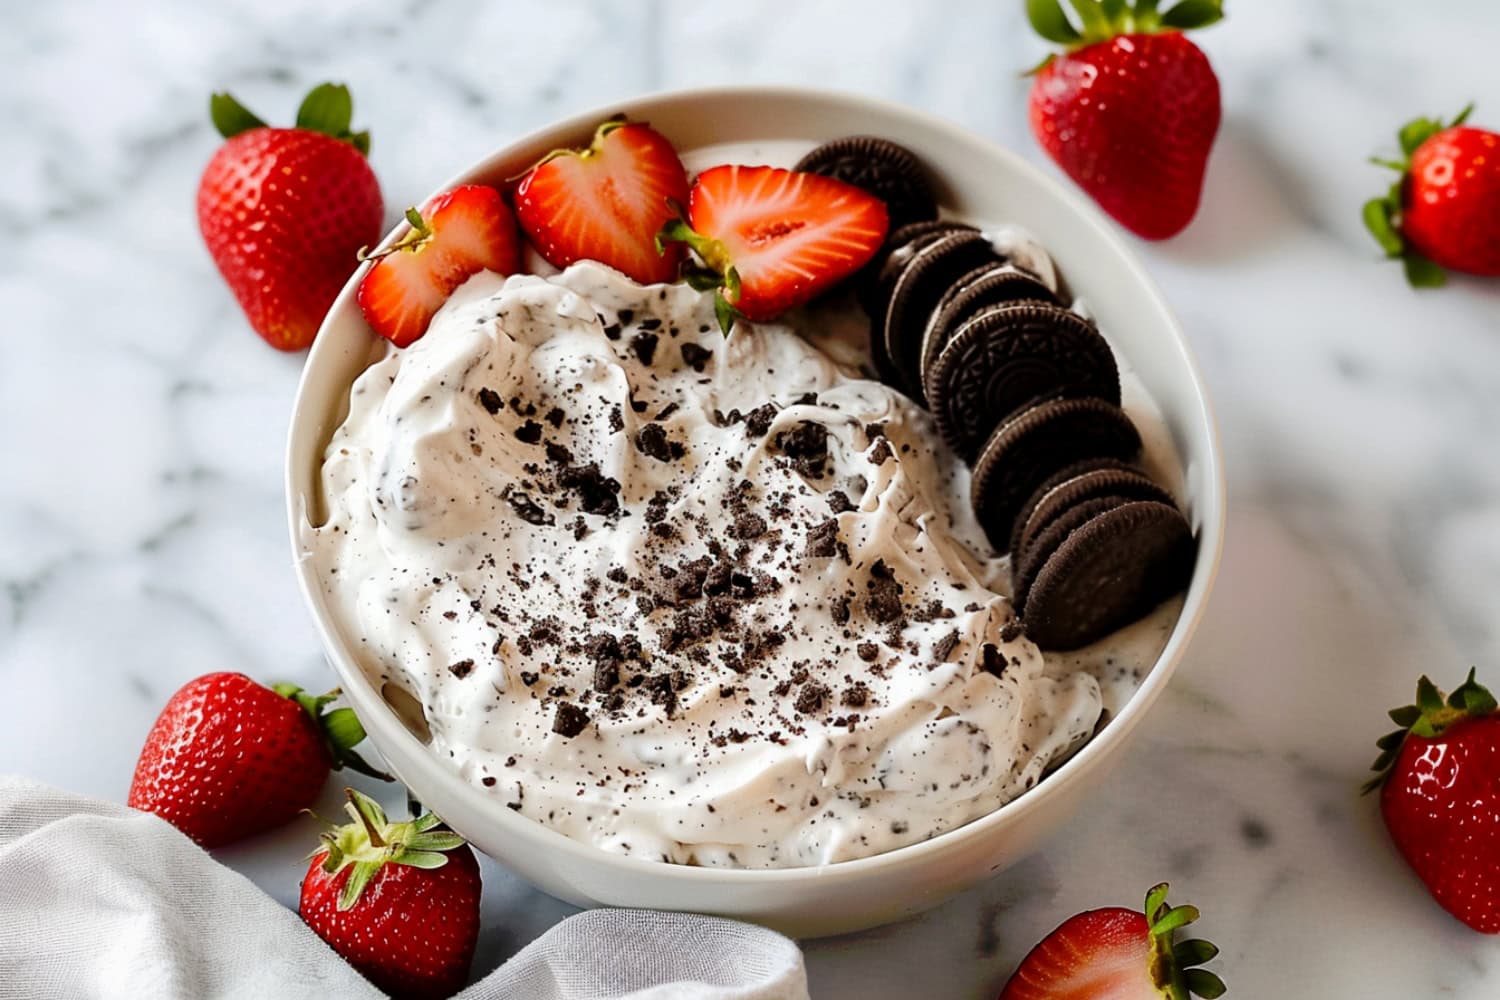 Oreo dip served in a festive bowl, topped with crushed cookies and fresh strawberries